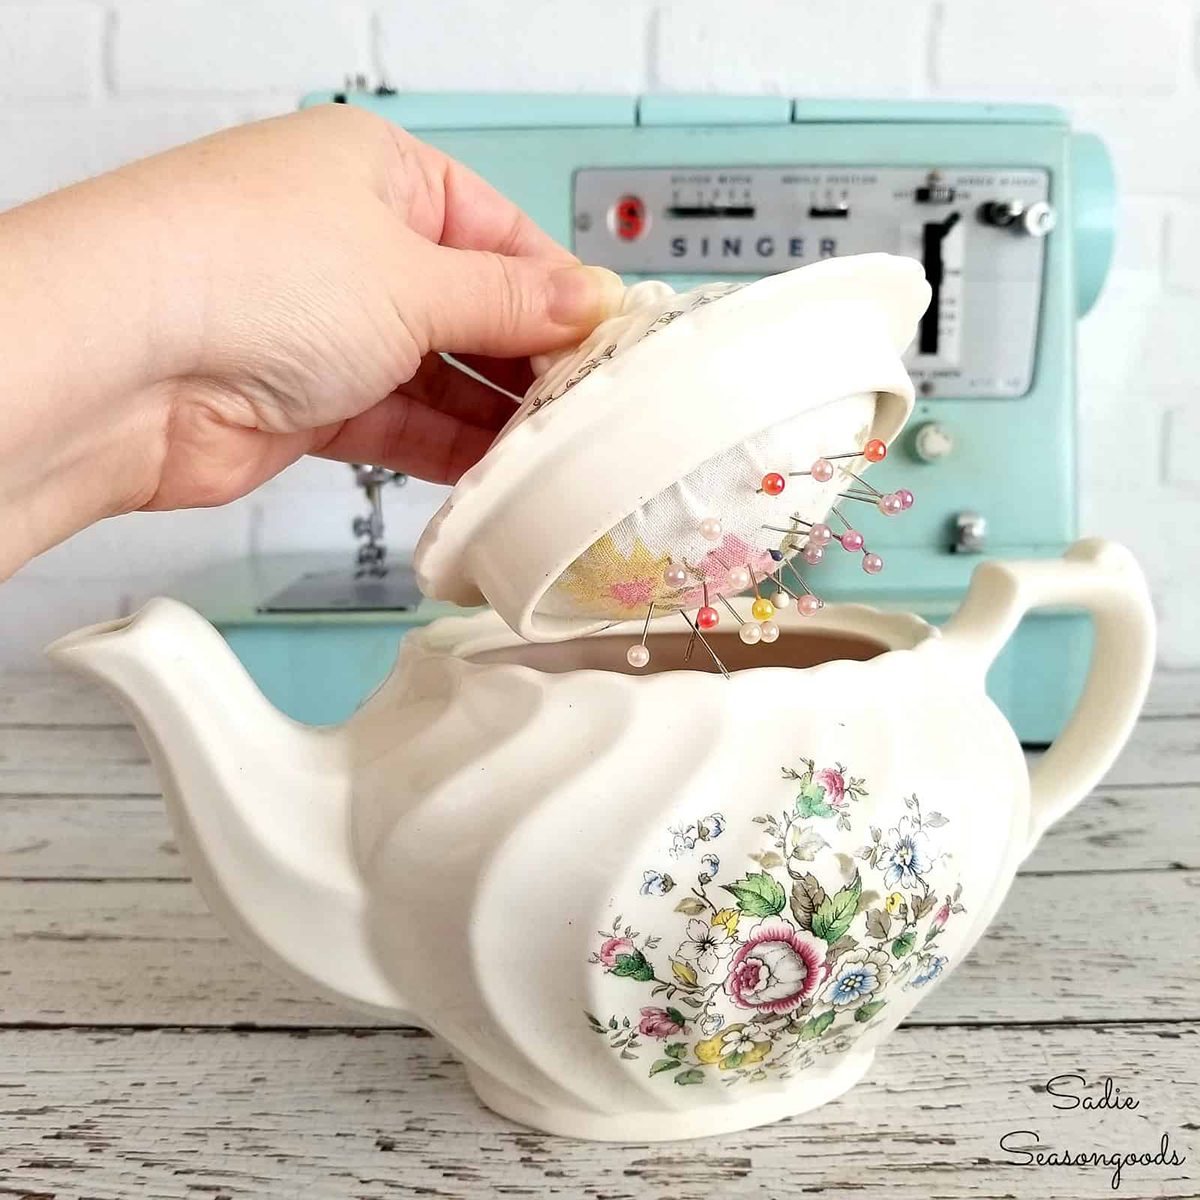 https://www.tasteofhome.com/wp-content/uploads/2019/04/How-to-upcycle-a-vintage-teapot-into-a-DIY-pincushion-and-sewing-kit-to-hide-pins-and-needles-by-Sadie-Seasongoods.jpg?fit=700%2C700